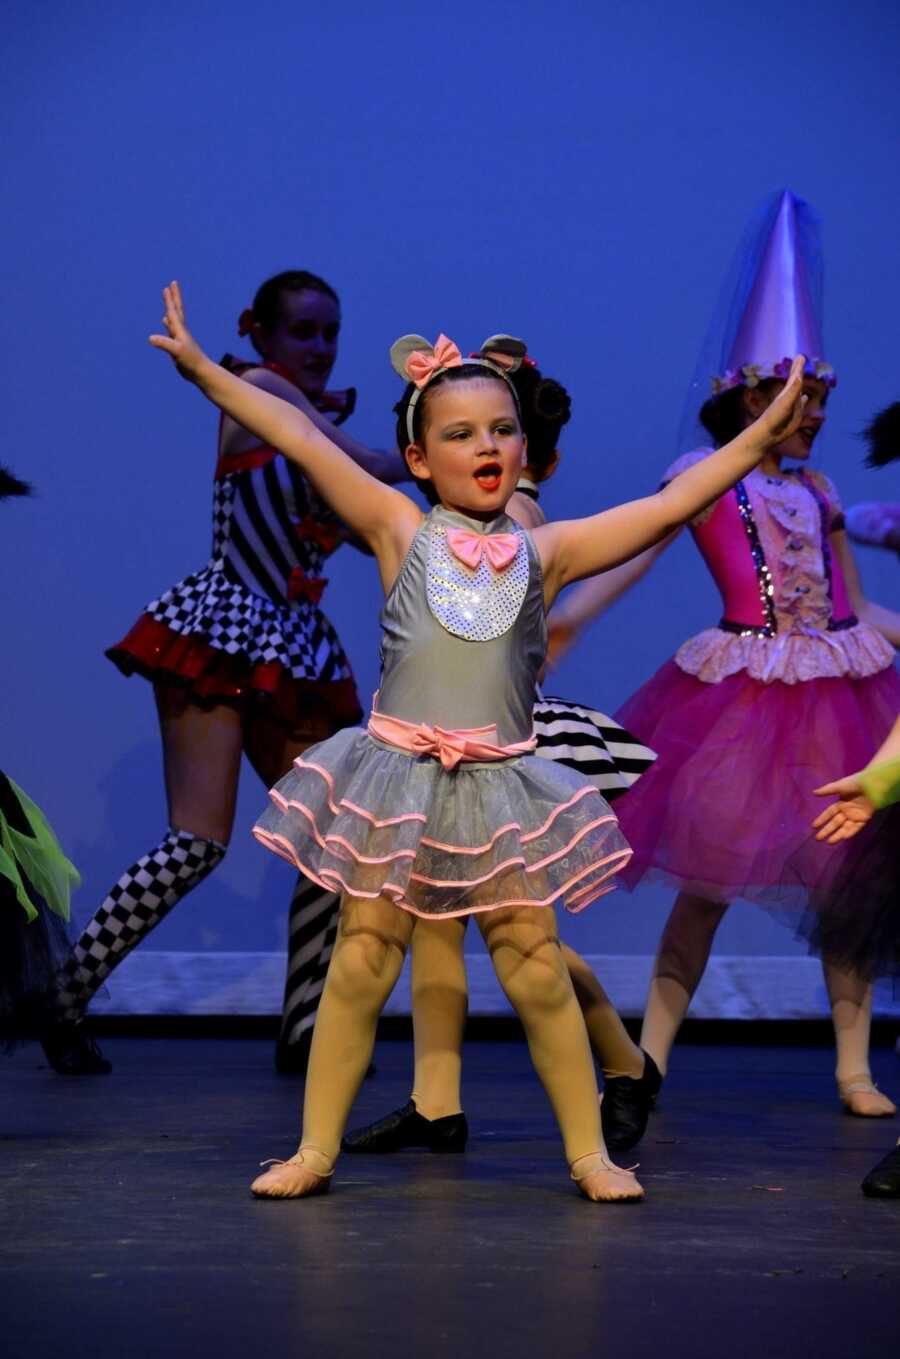 Girl dancing on stage in gray and pink tutu